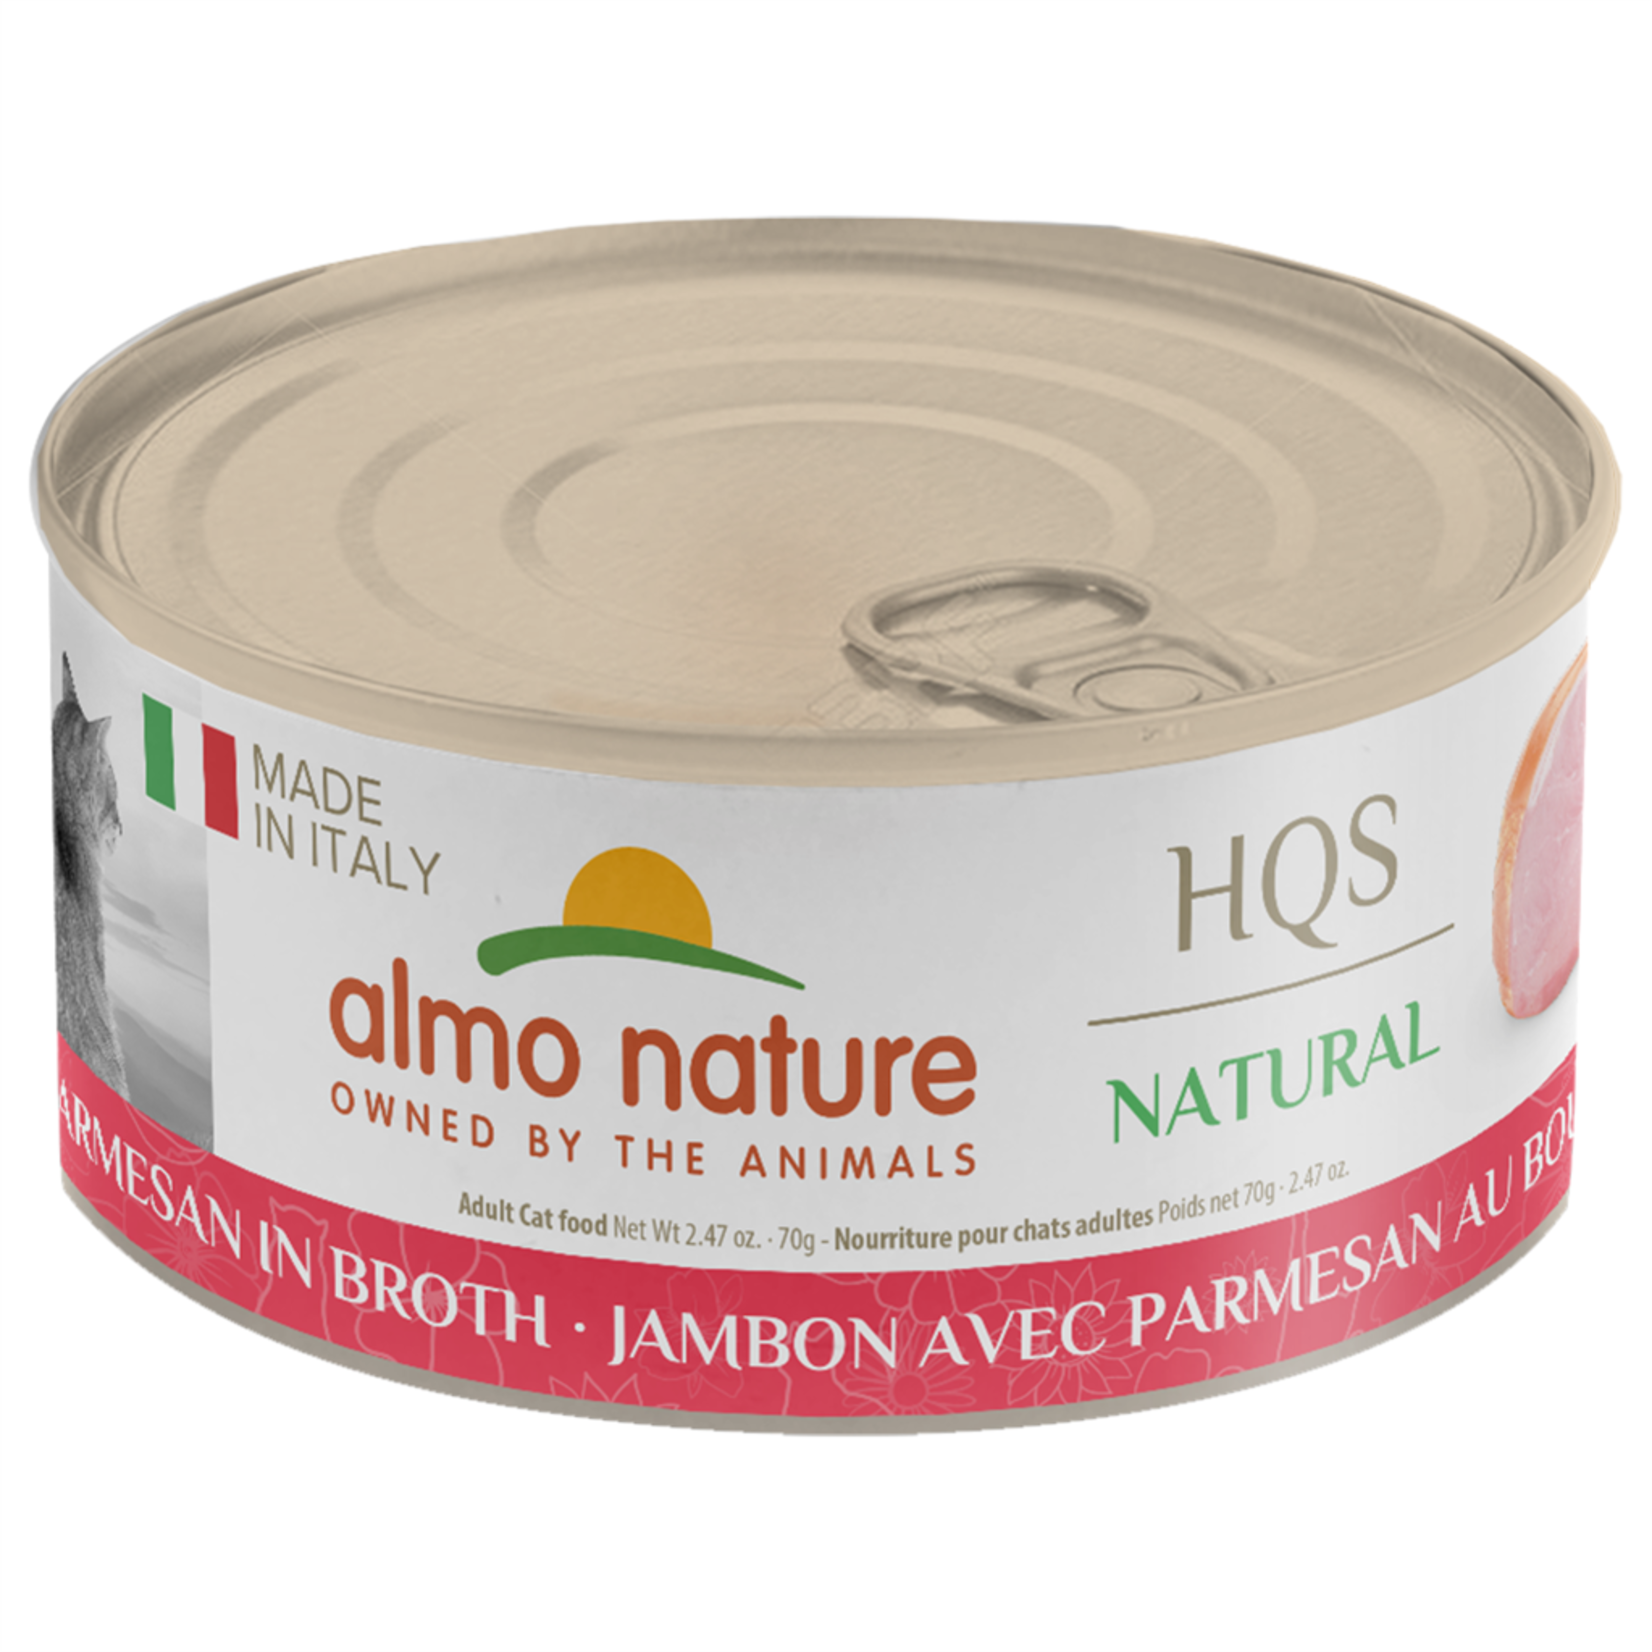 Almo Nature Made in Italy Ham, Parmesan Broth 70GM